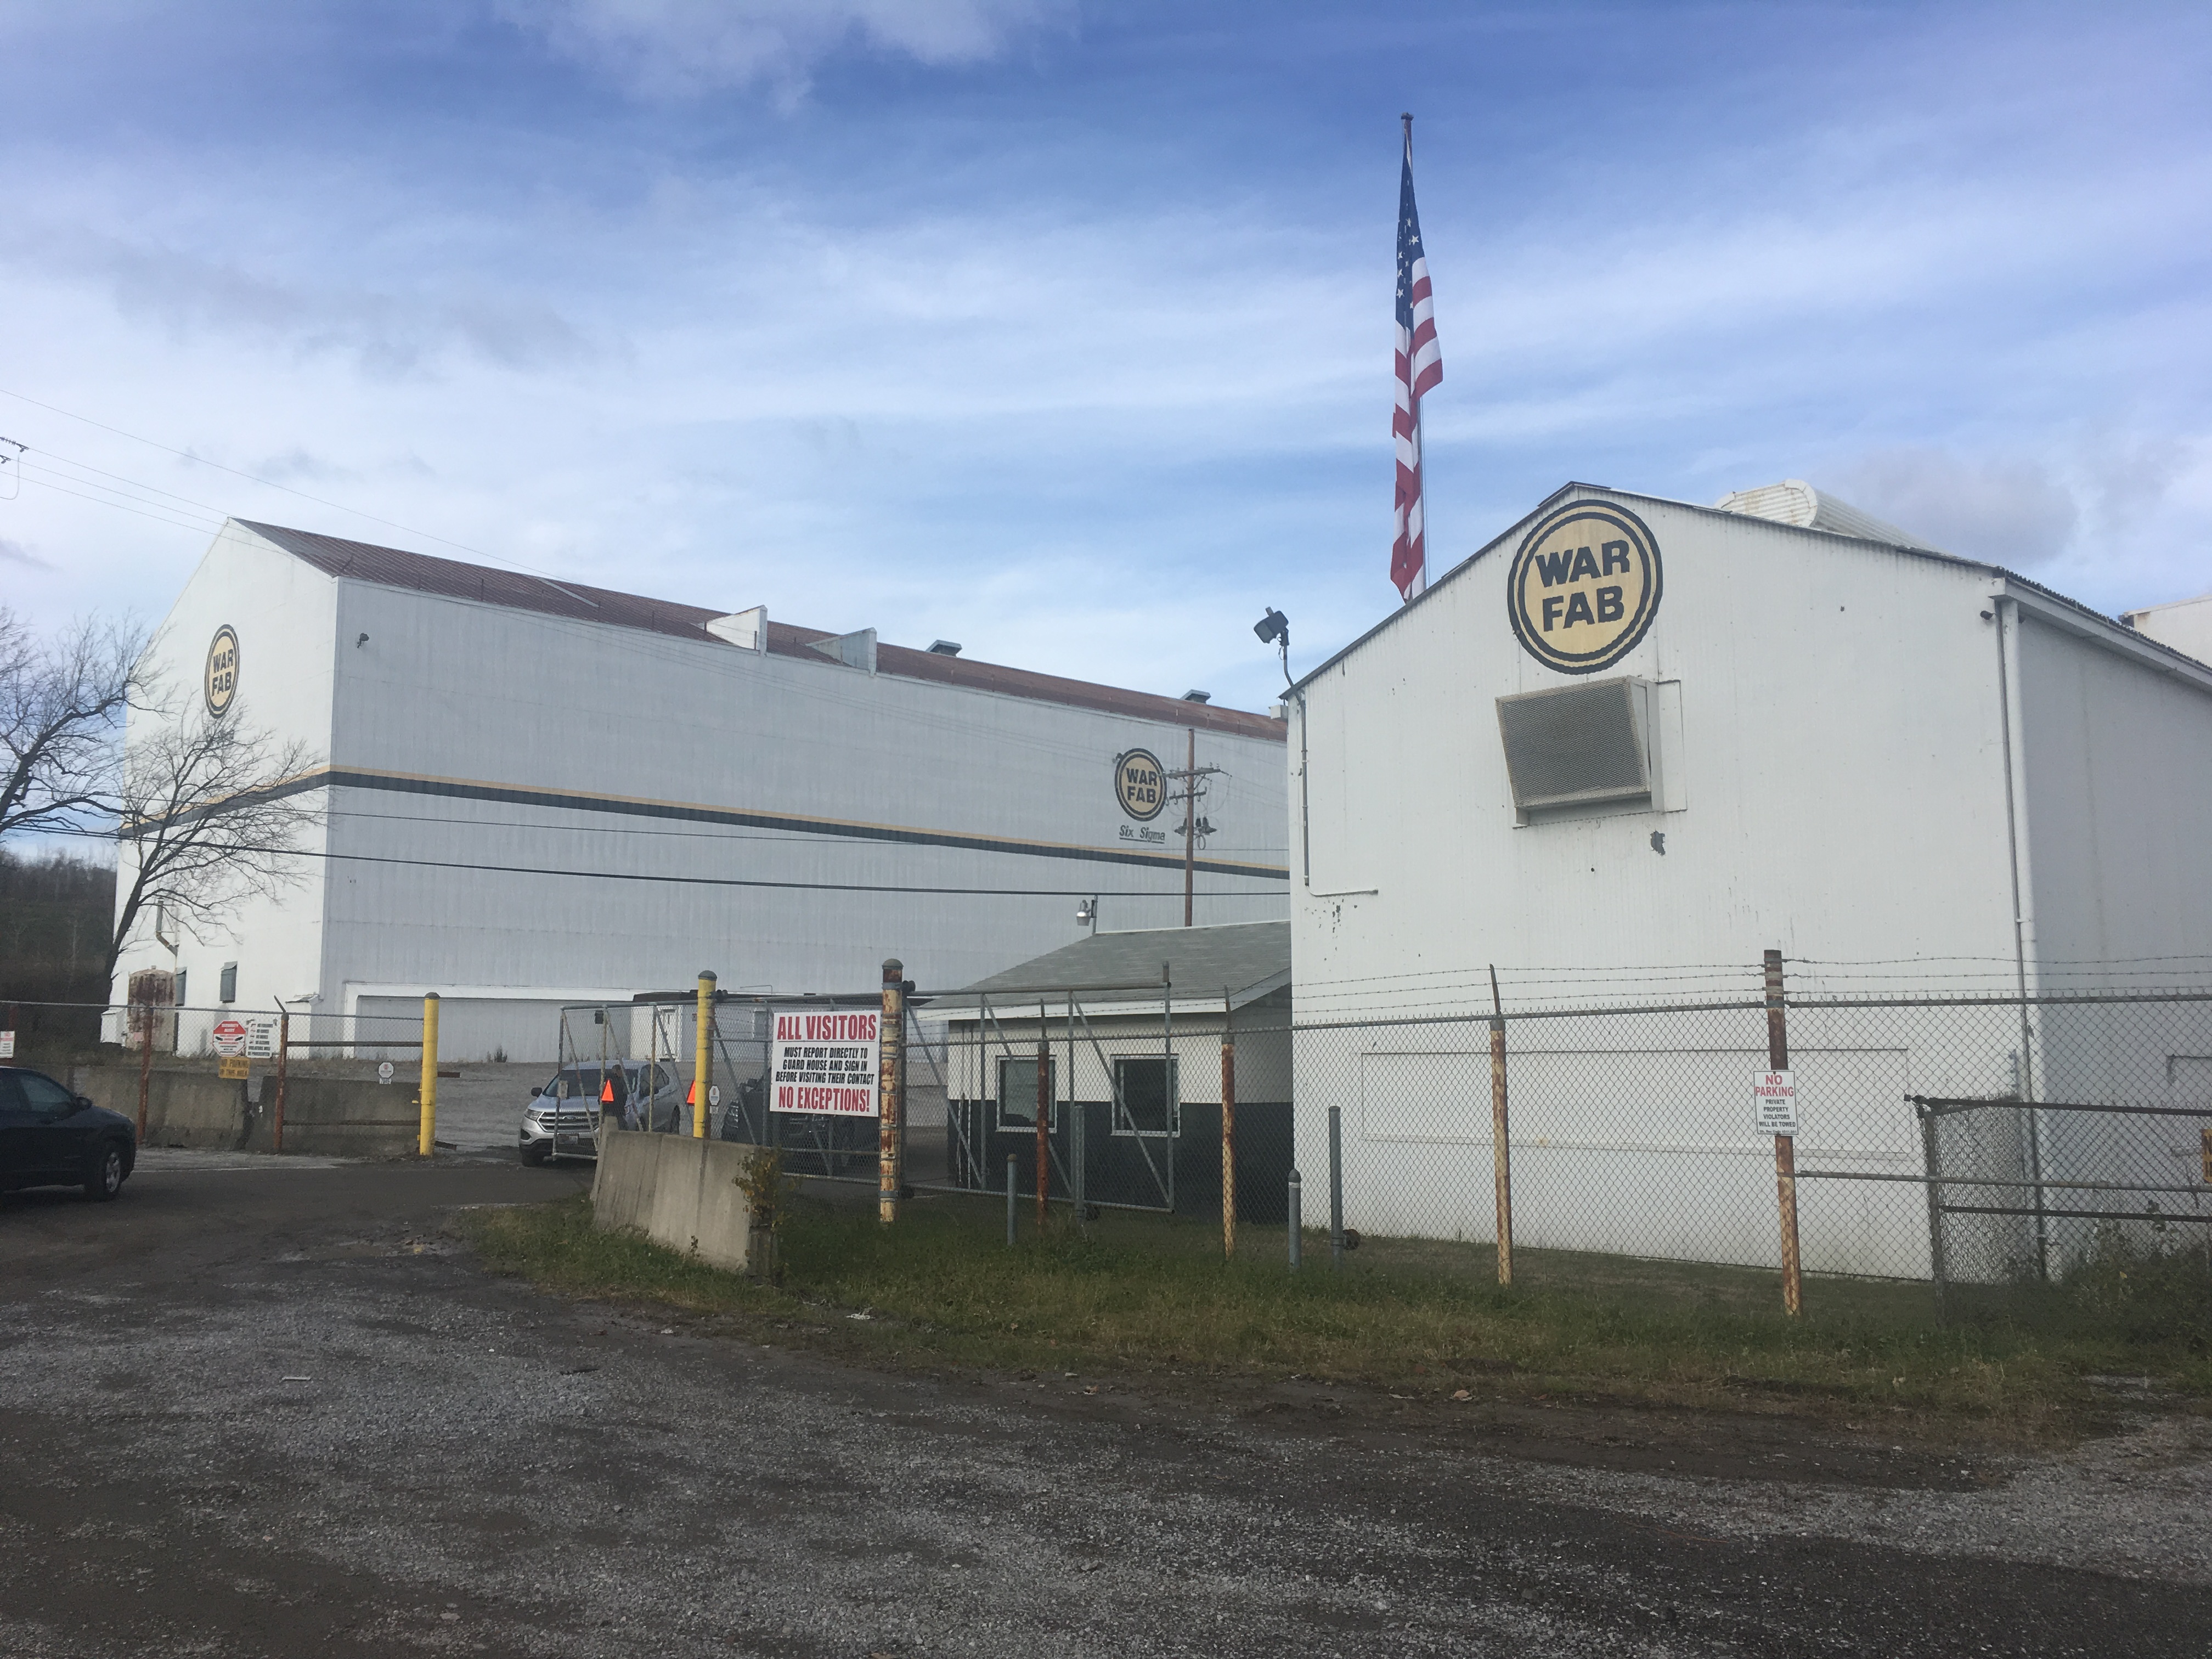 Agents with the Federal Bureau of Investigation and the Internal Revenue Service are on site at Warren Fabricating Corp. in Hubbard, an FBI spokeswoman confirmed. The IRS is the lead investigator on the case, the FBI said.